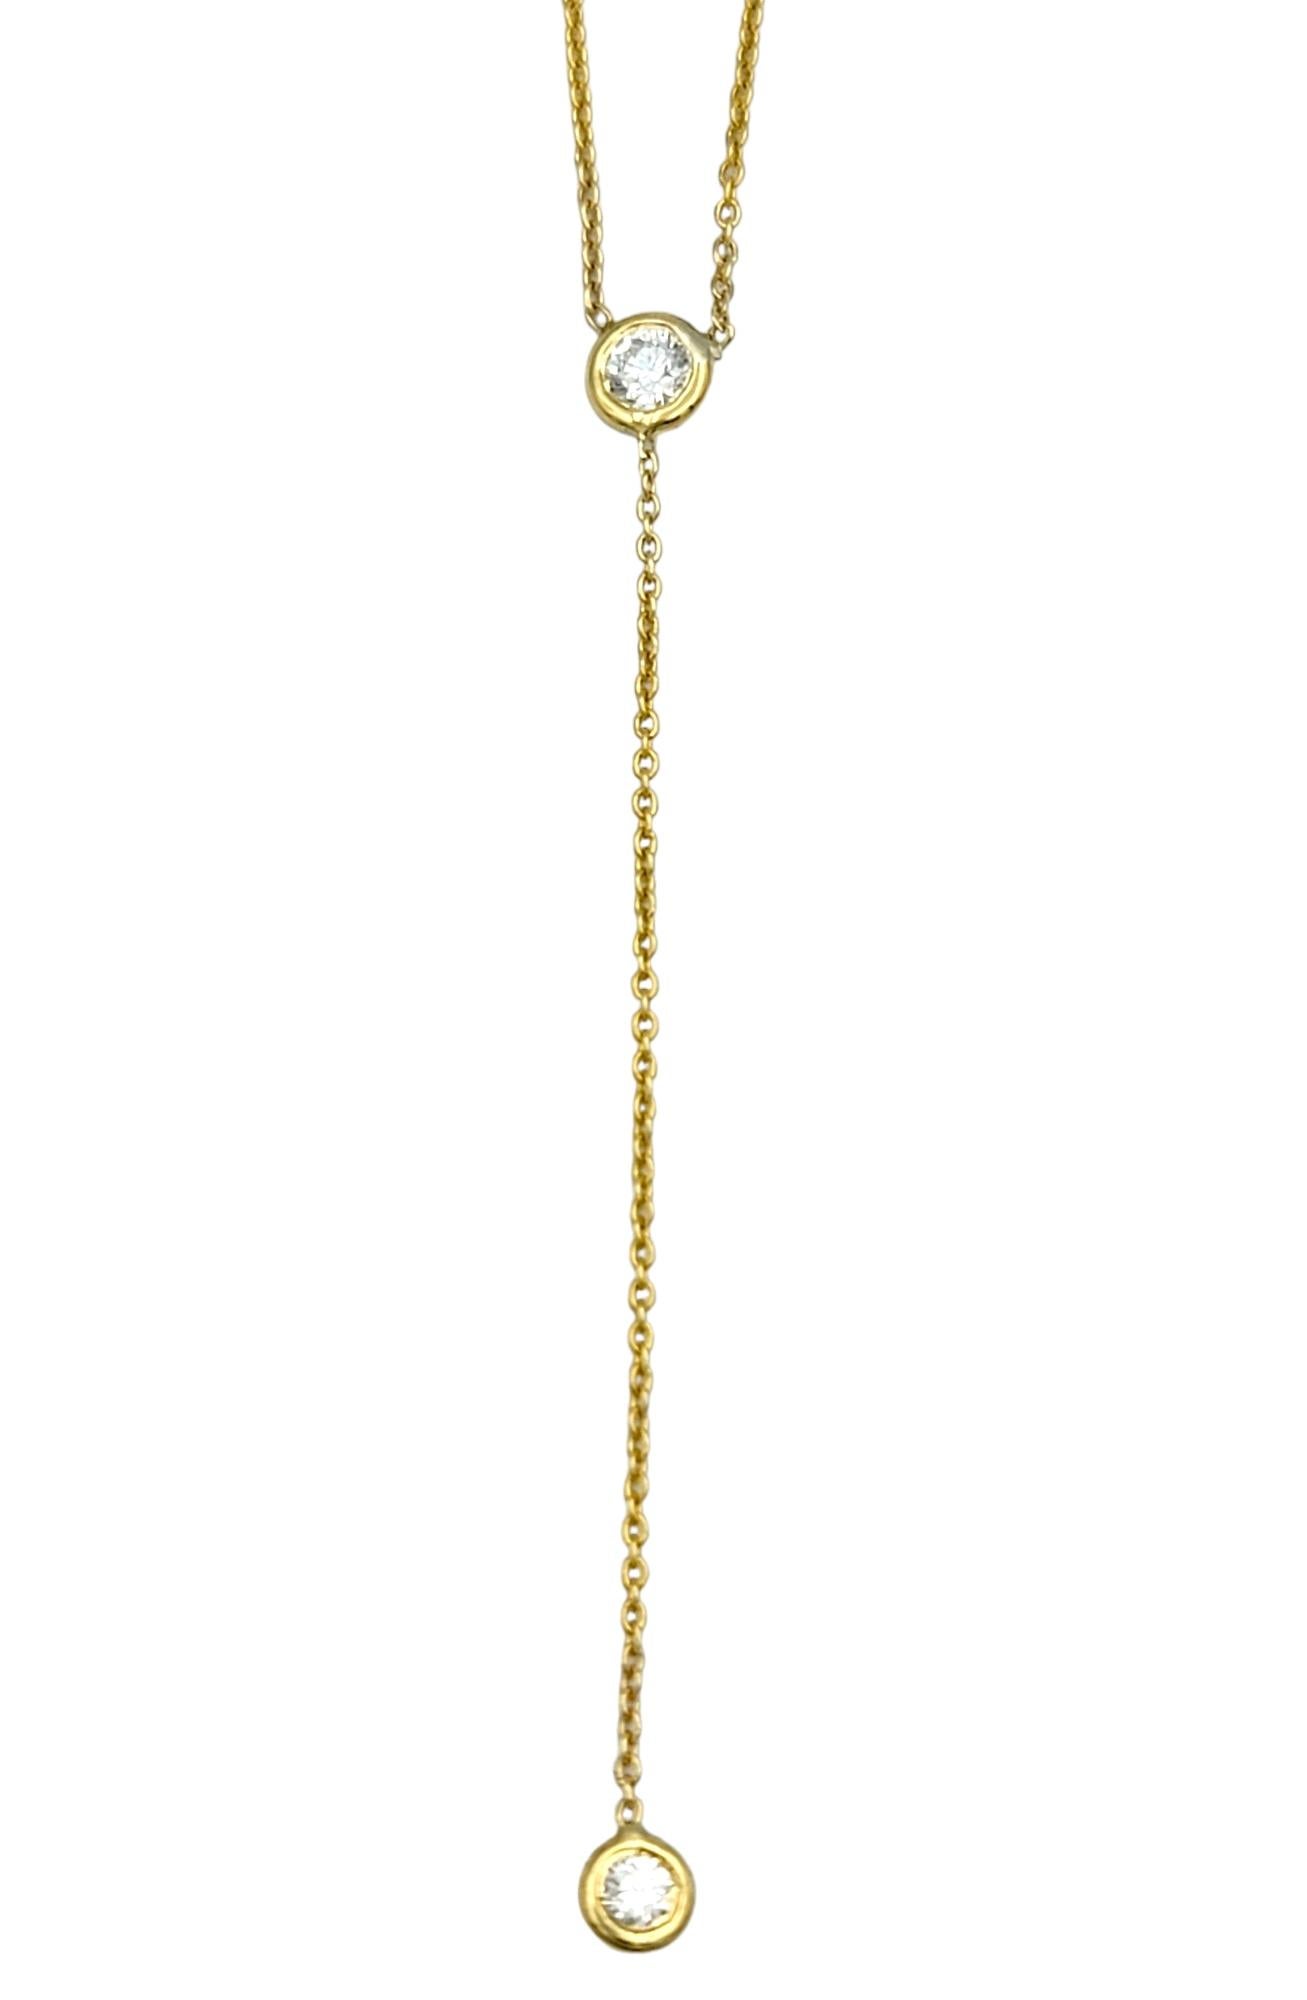 Contemporary Roberto Coin 'Diamonds by the Inch' Drop Lariat Necklace in 18 Karat Yellow Gold For Sale